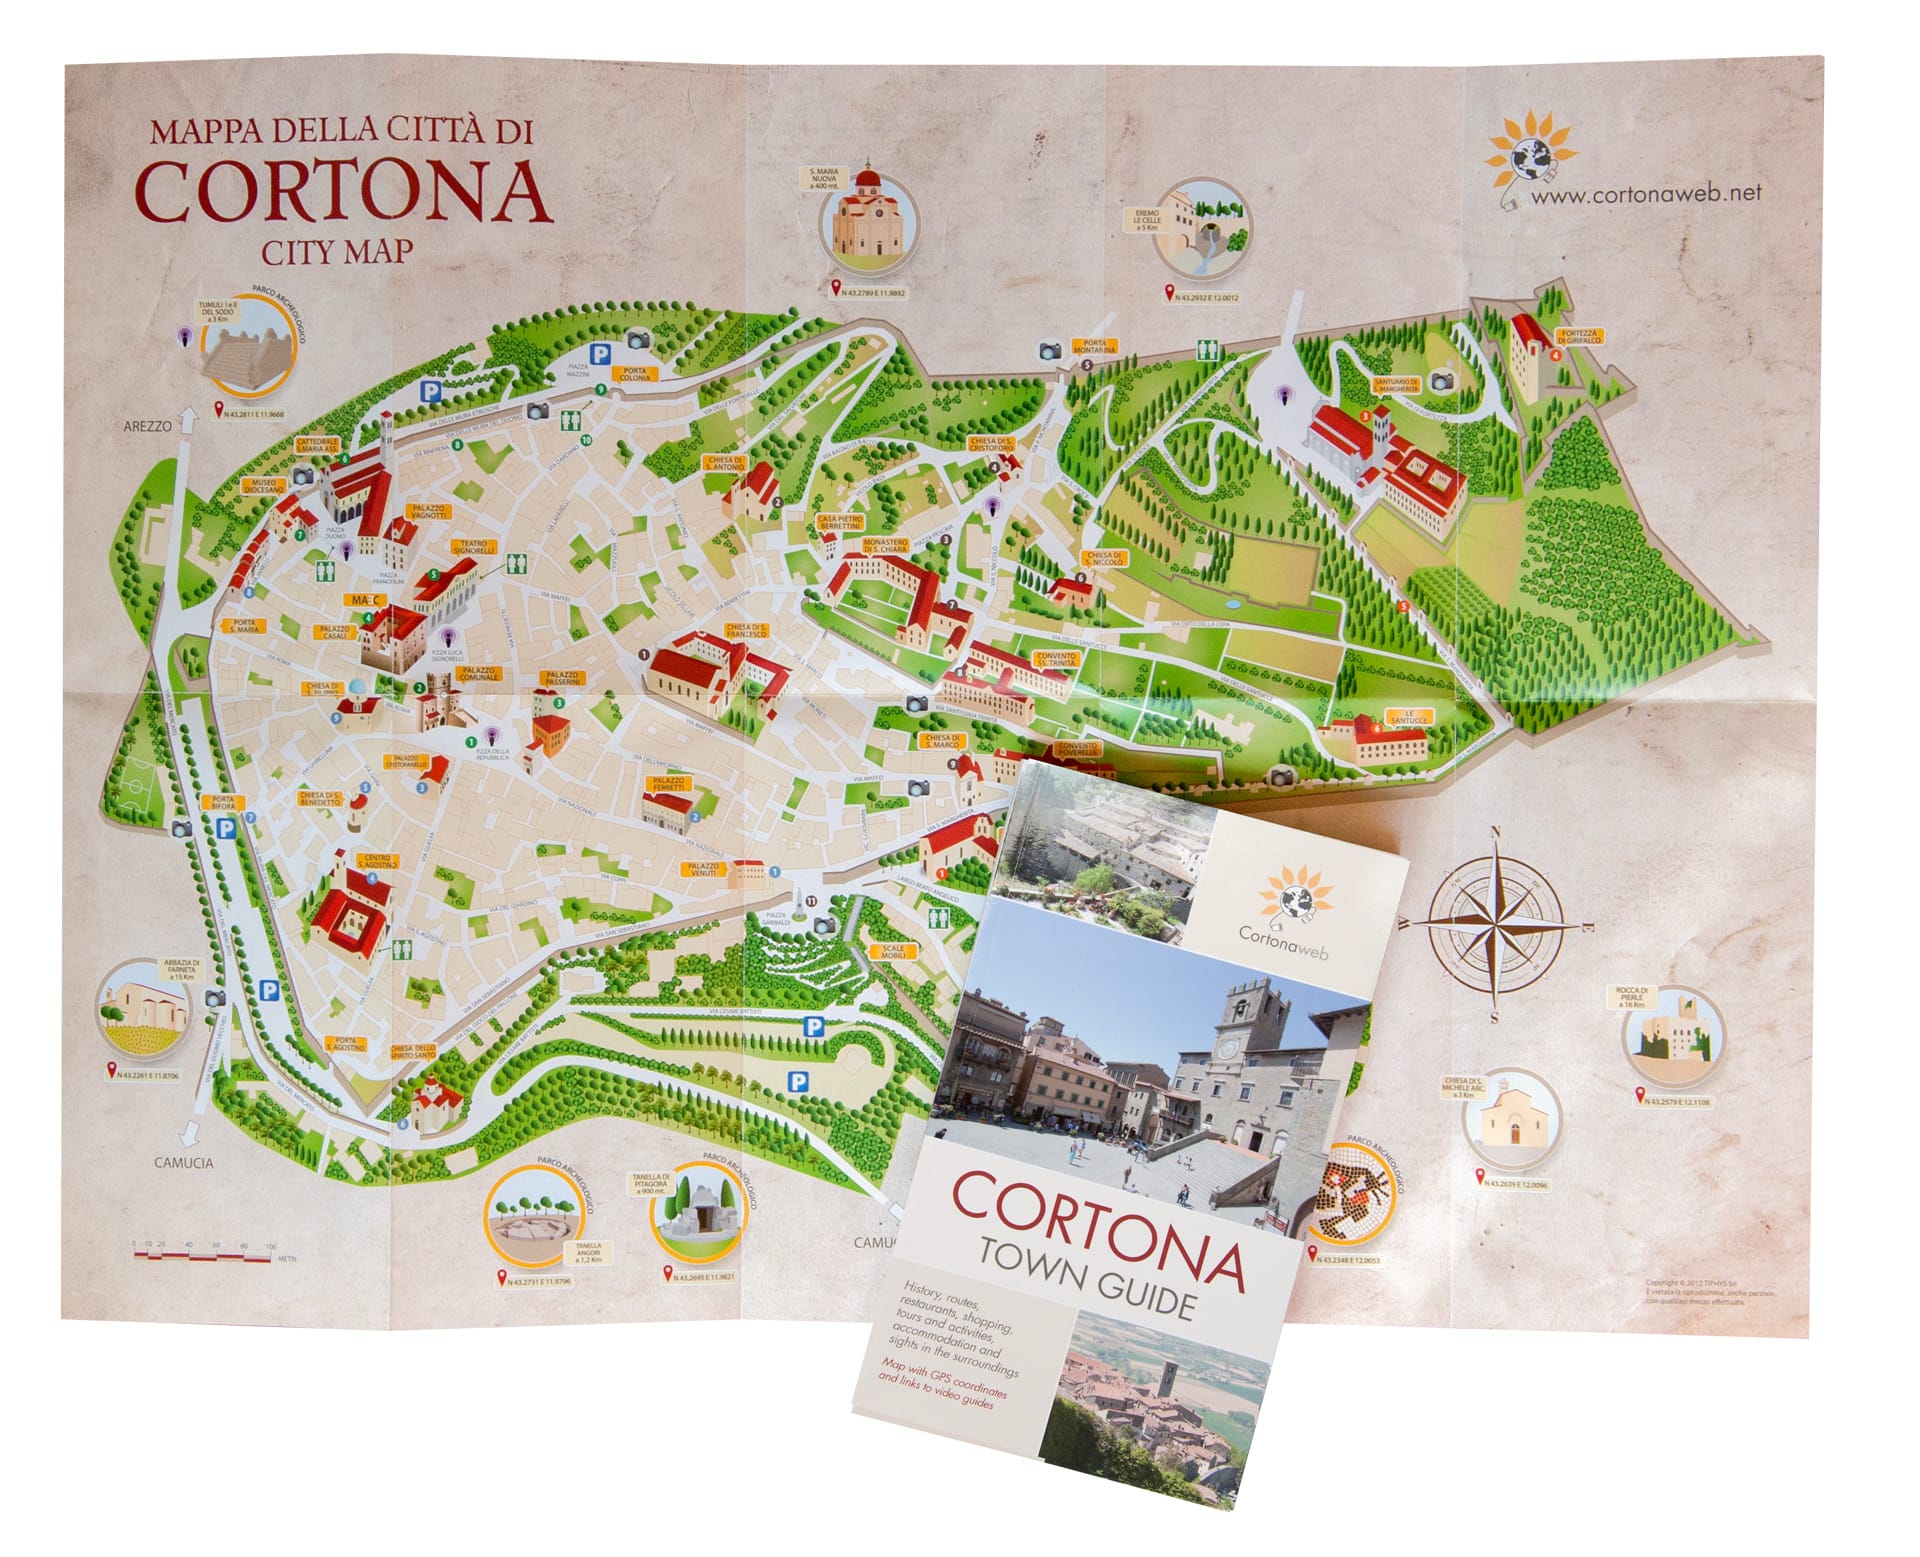 Visit Cortona Suggested Tours To Visiting Monuments And Squares